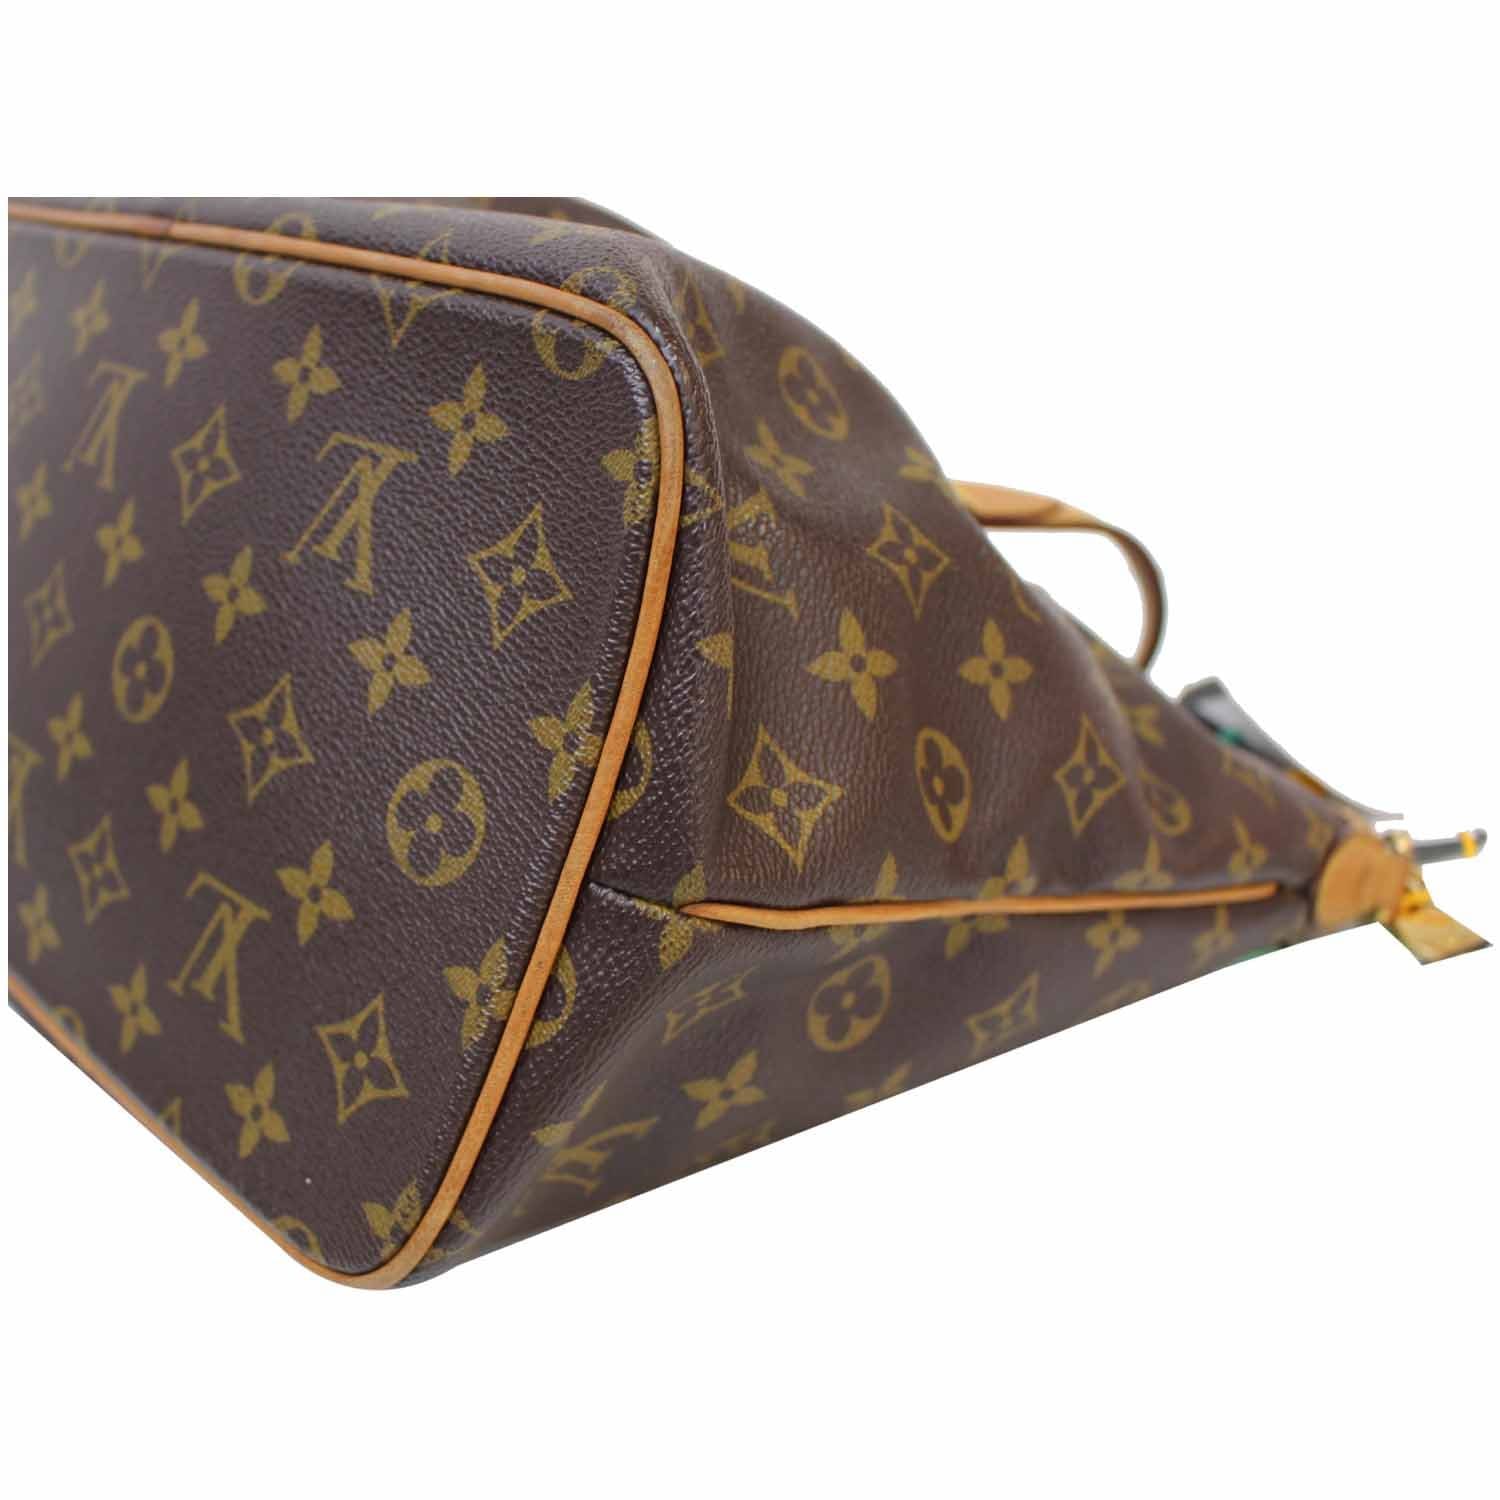 ❤️SOLD❤️Preowned Louis Vuitton Palm Springs Pm